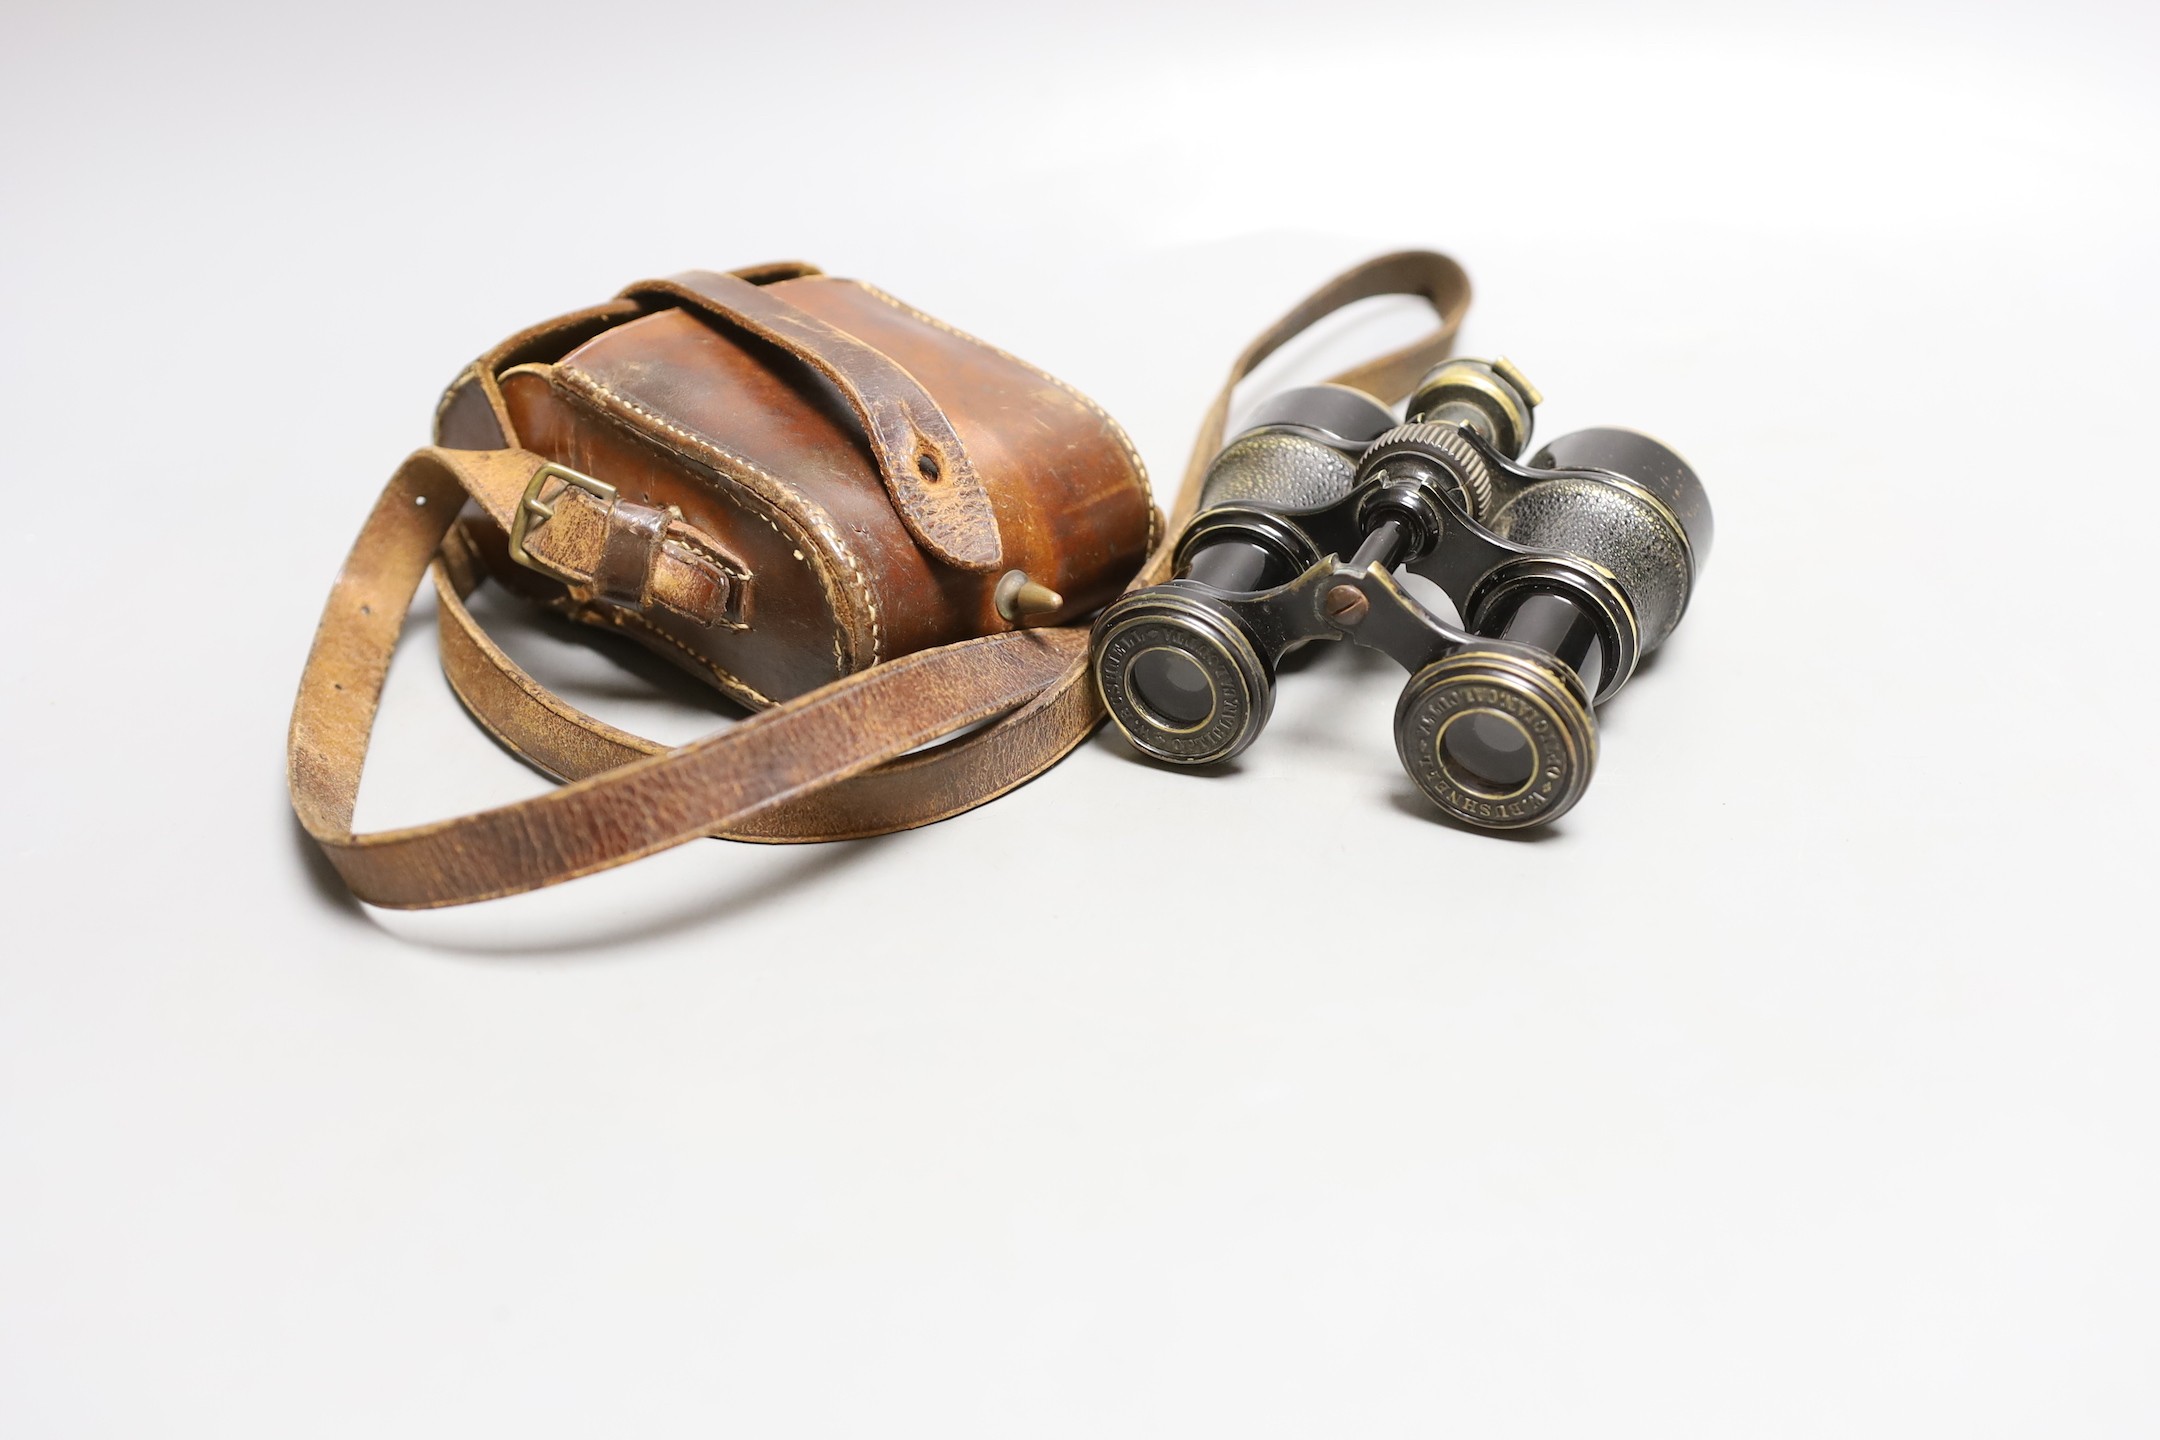 W. Bushnell military leather cased binoculars with fitted compass reg no. 416649